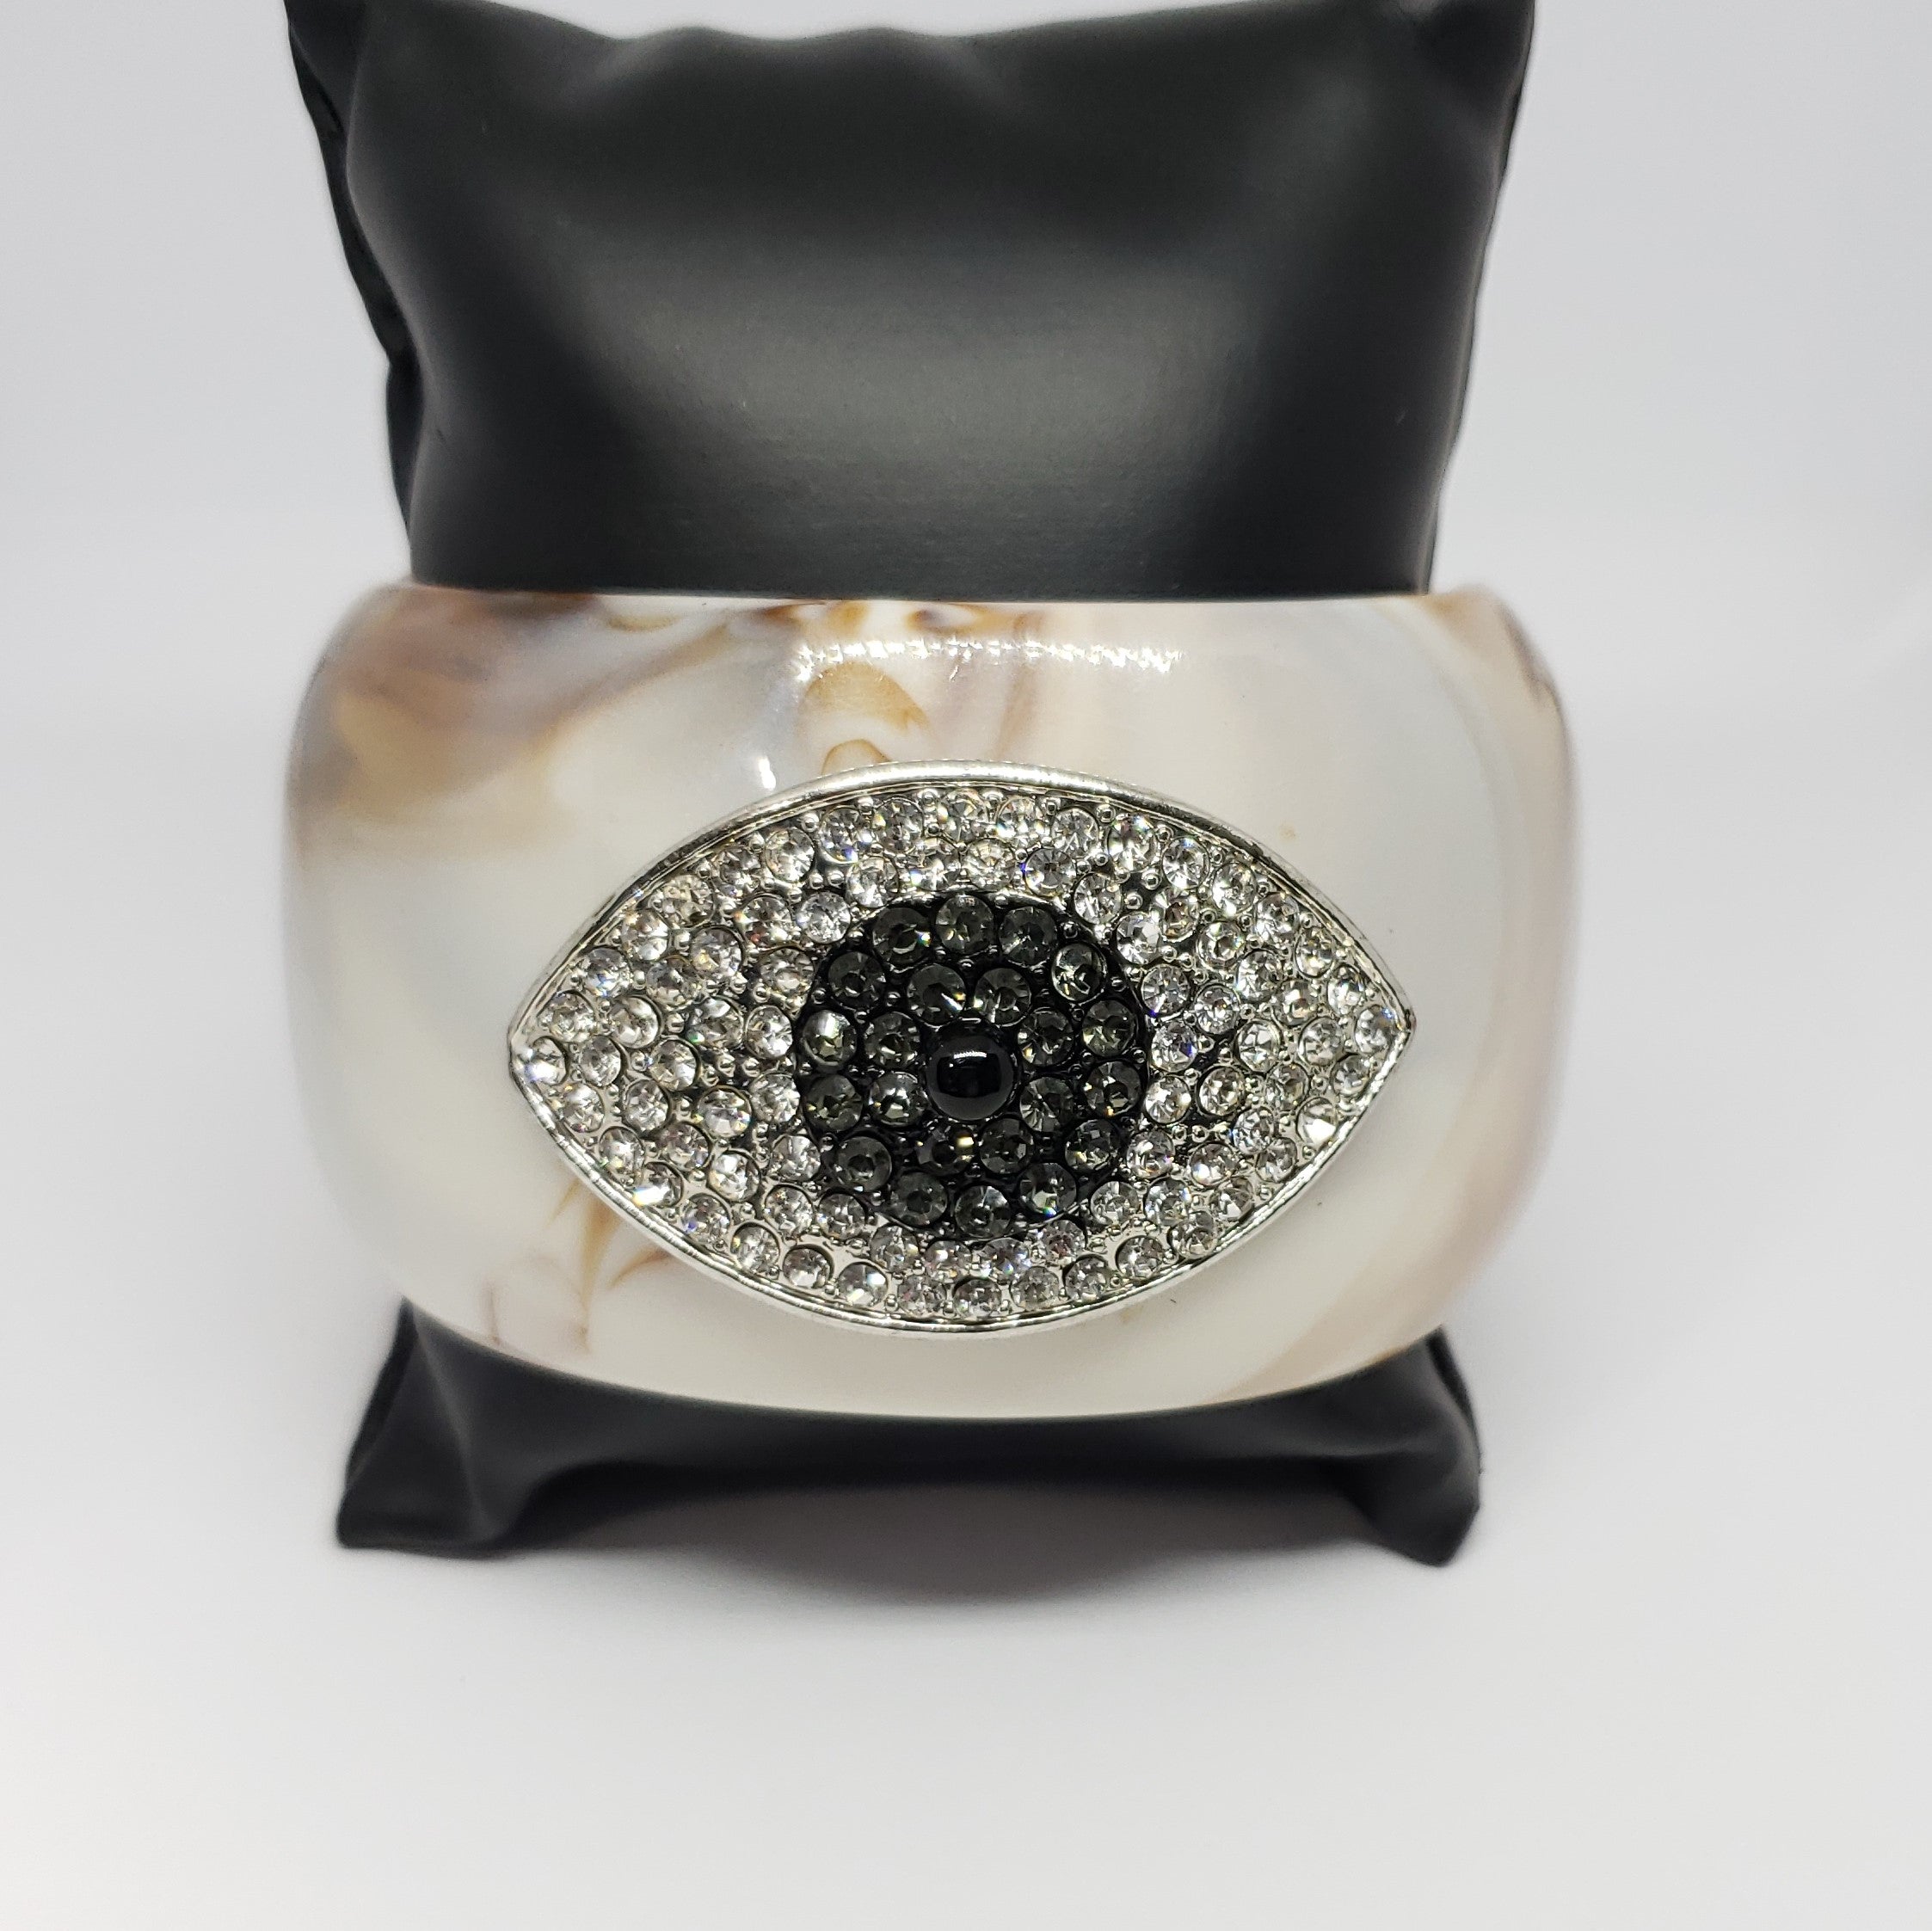 Evil Eye Crystals and Resin in Cream Cuff - Houzz of DVA Boutique